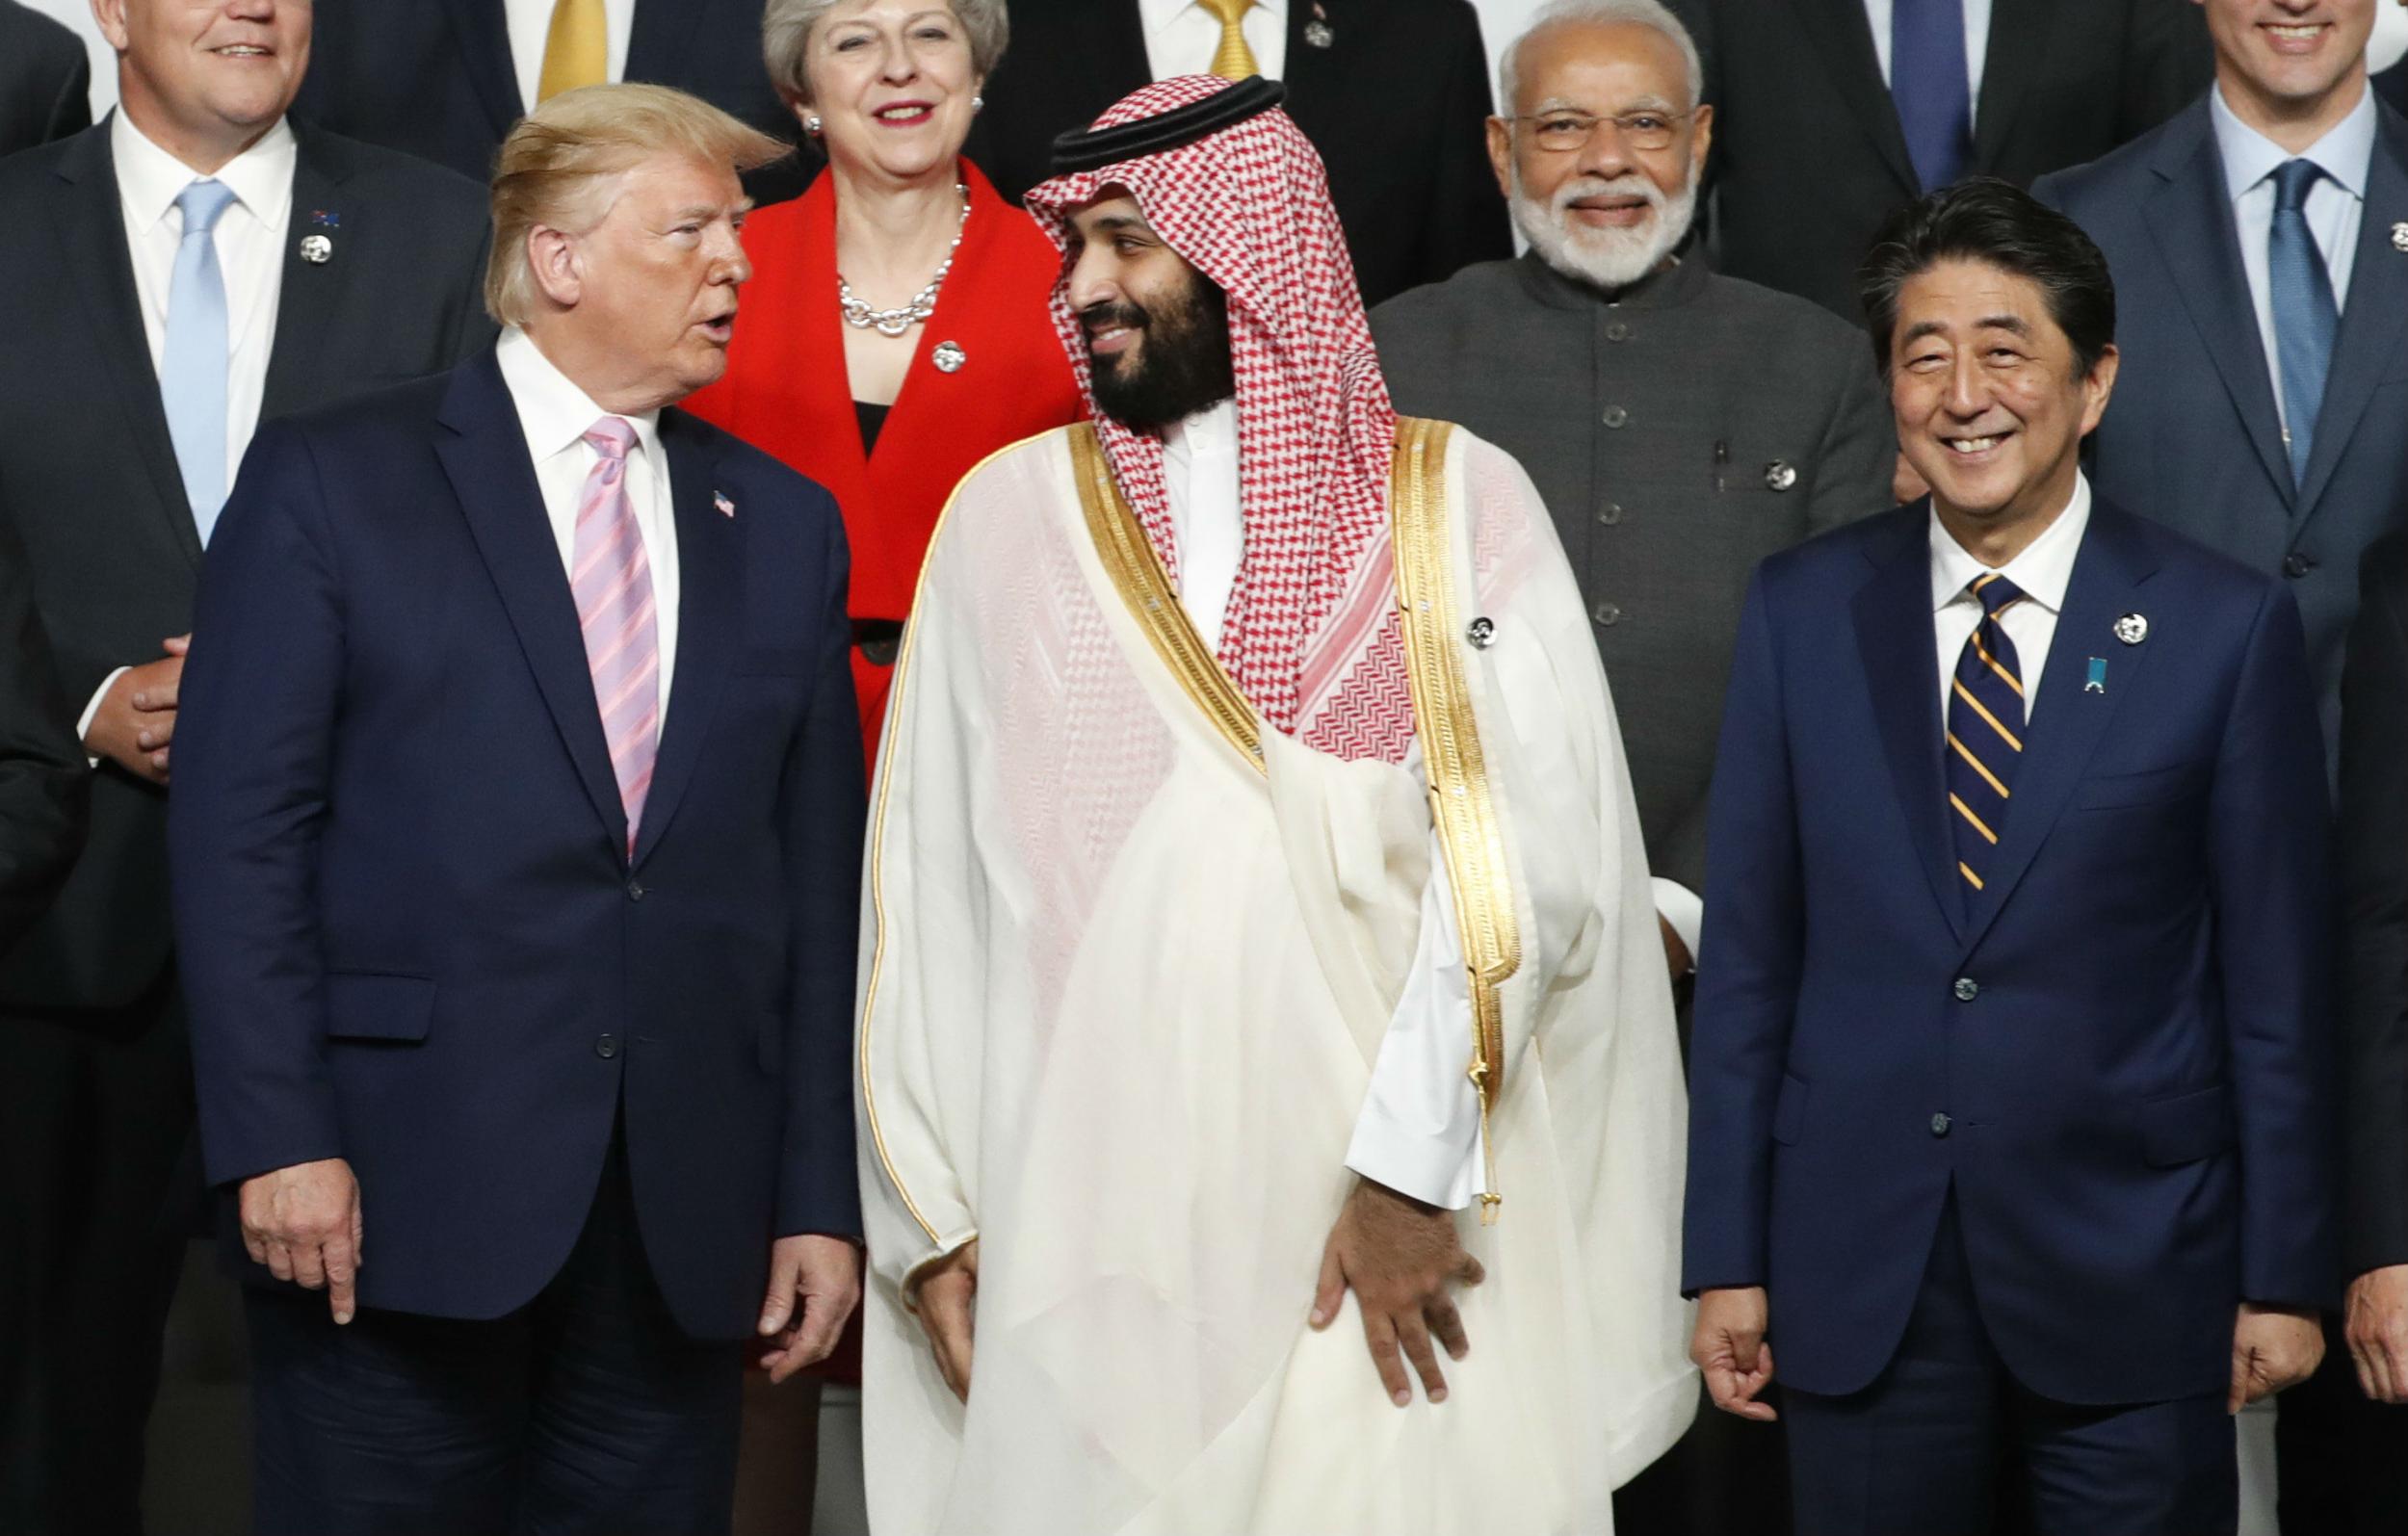 Trump speaks to the Saudi crown prince at this year’s G20 summit in Japan